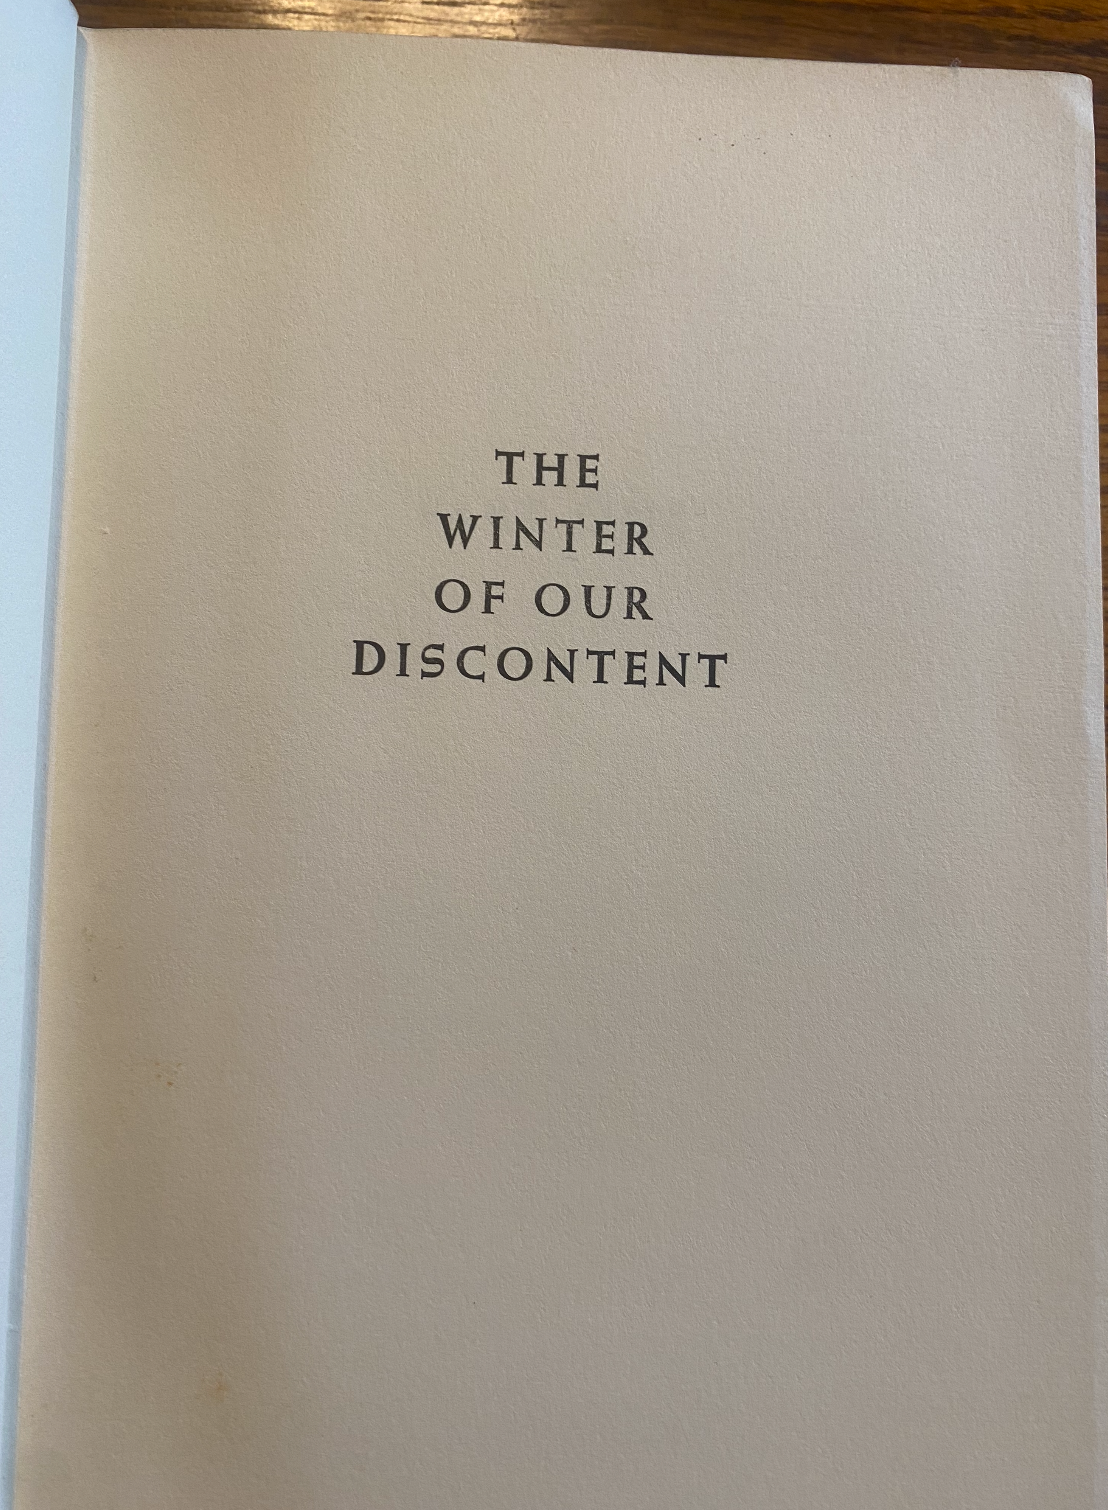 The Winter of Our Discontent - John Steinbeck (First Edition)